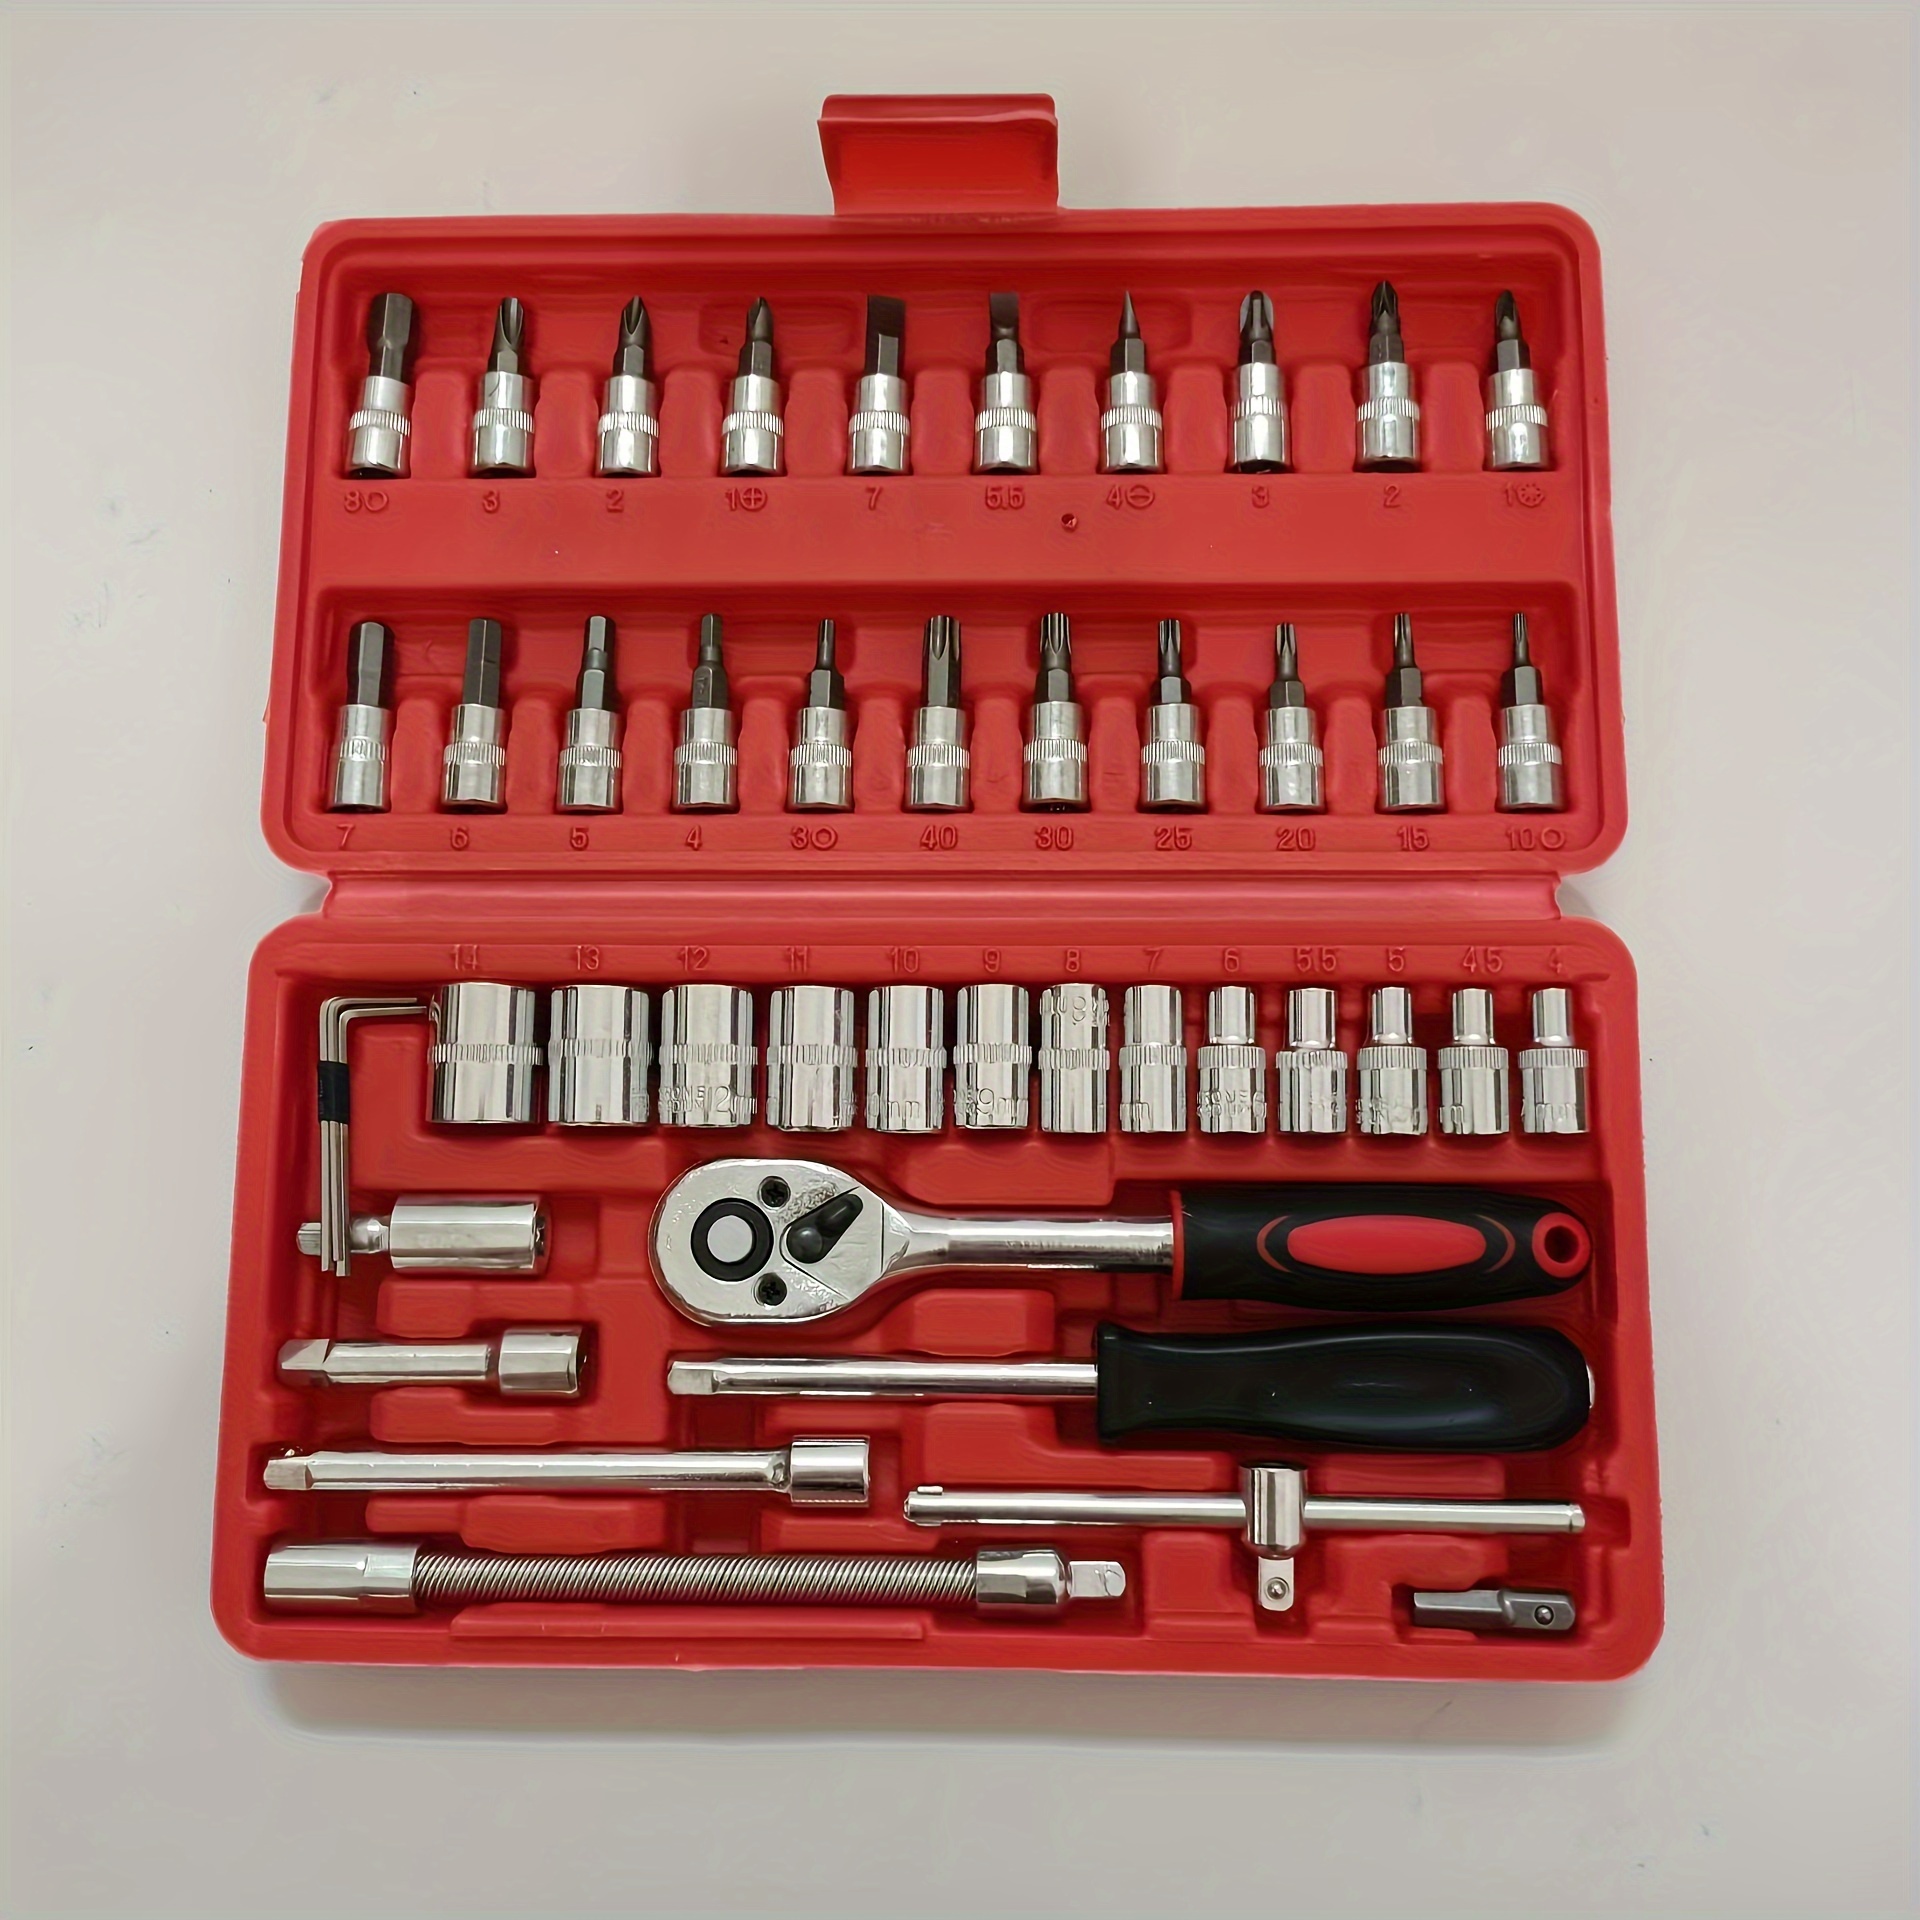 1pc Maritime Equipment Kit Wrench Sockets Maintenance Tools For